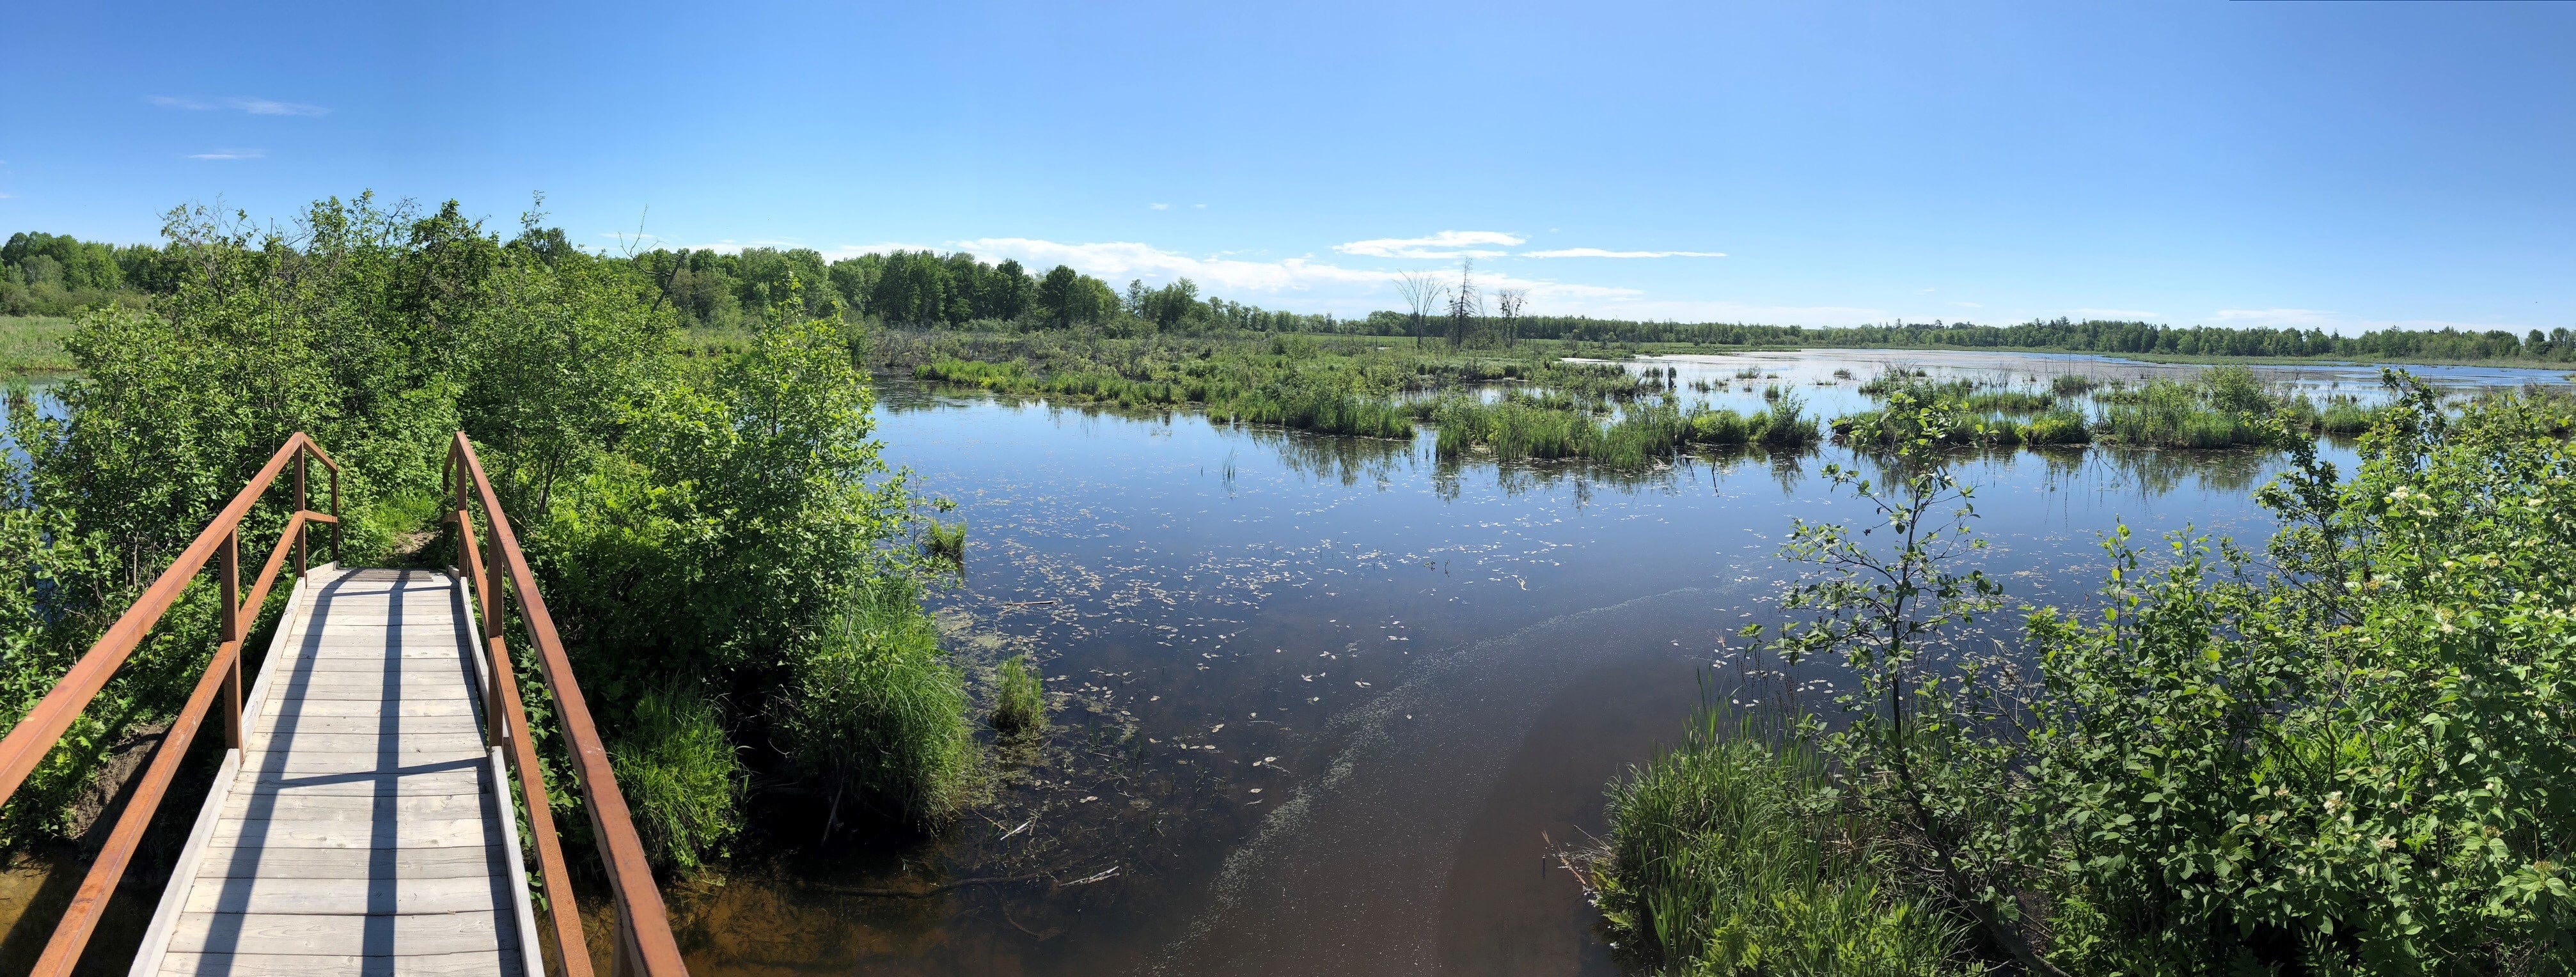 Op/Ed: Getting wetland conservation right will help solve many issues